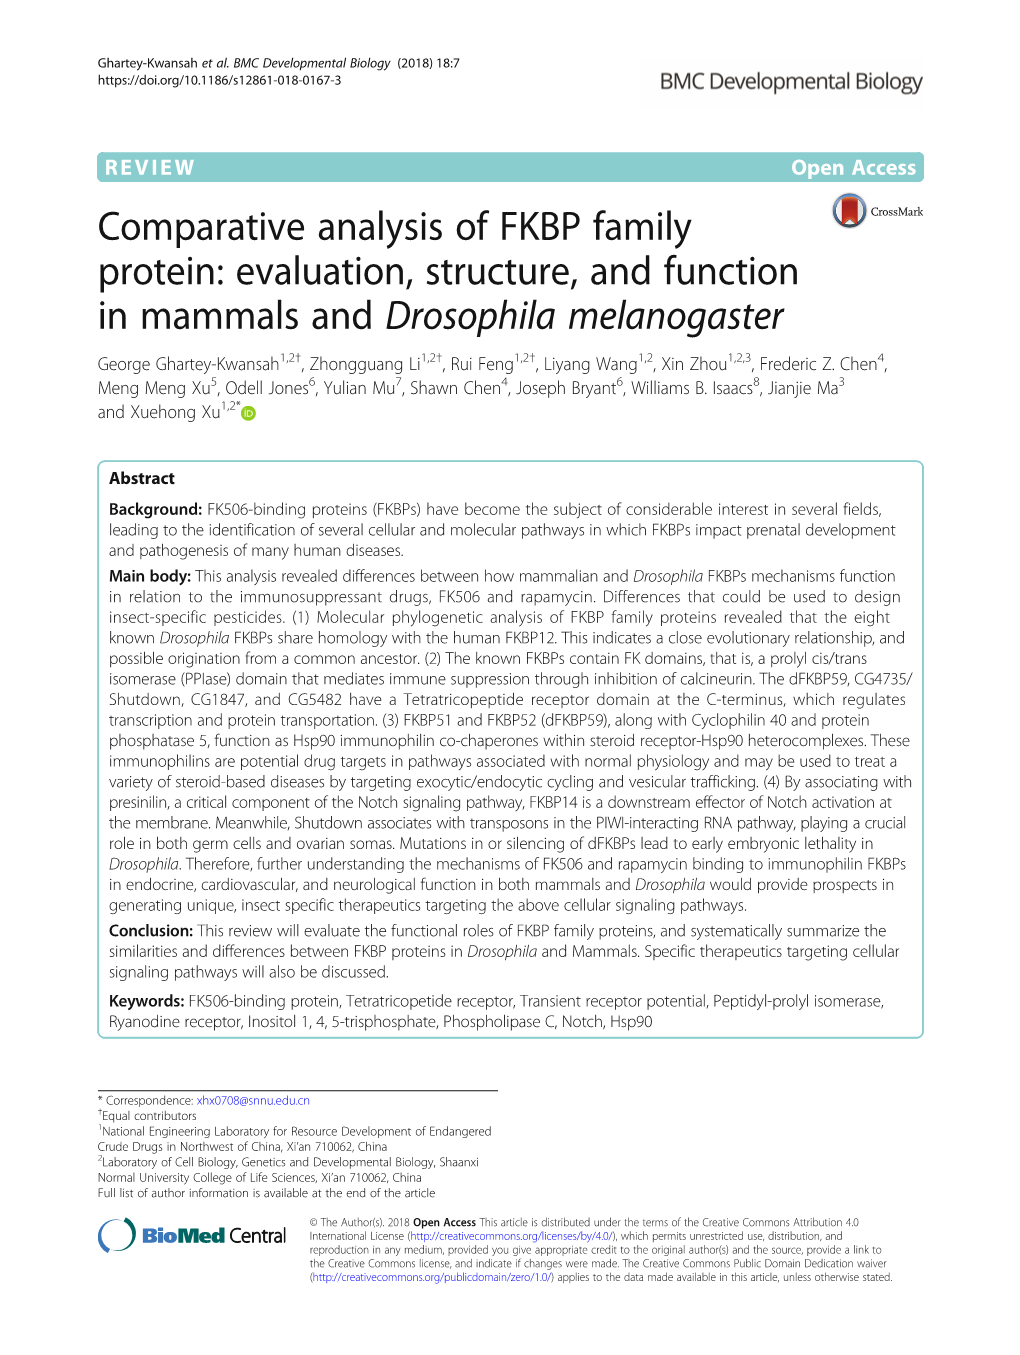 Comparative Analysis of FKBP Family Protein: Evaluation, Structure, and Function in Mammals and Drosophila Melanogaster